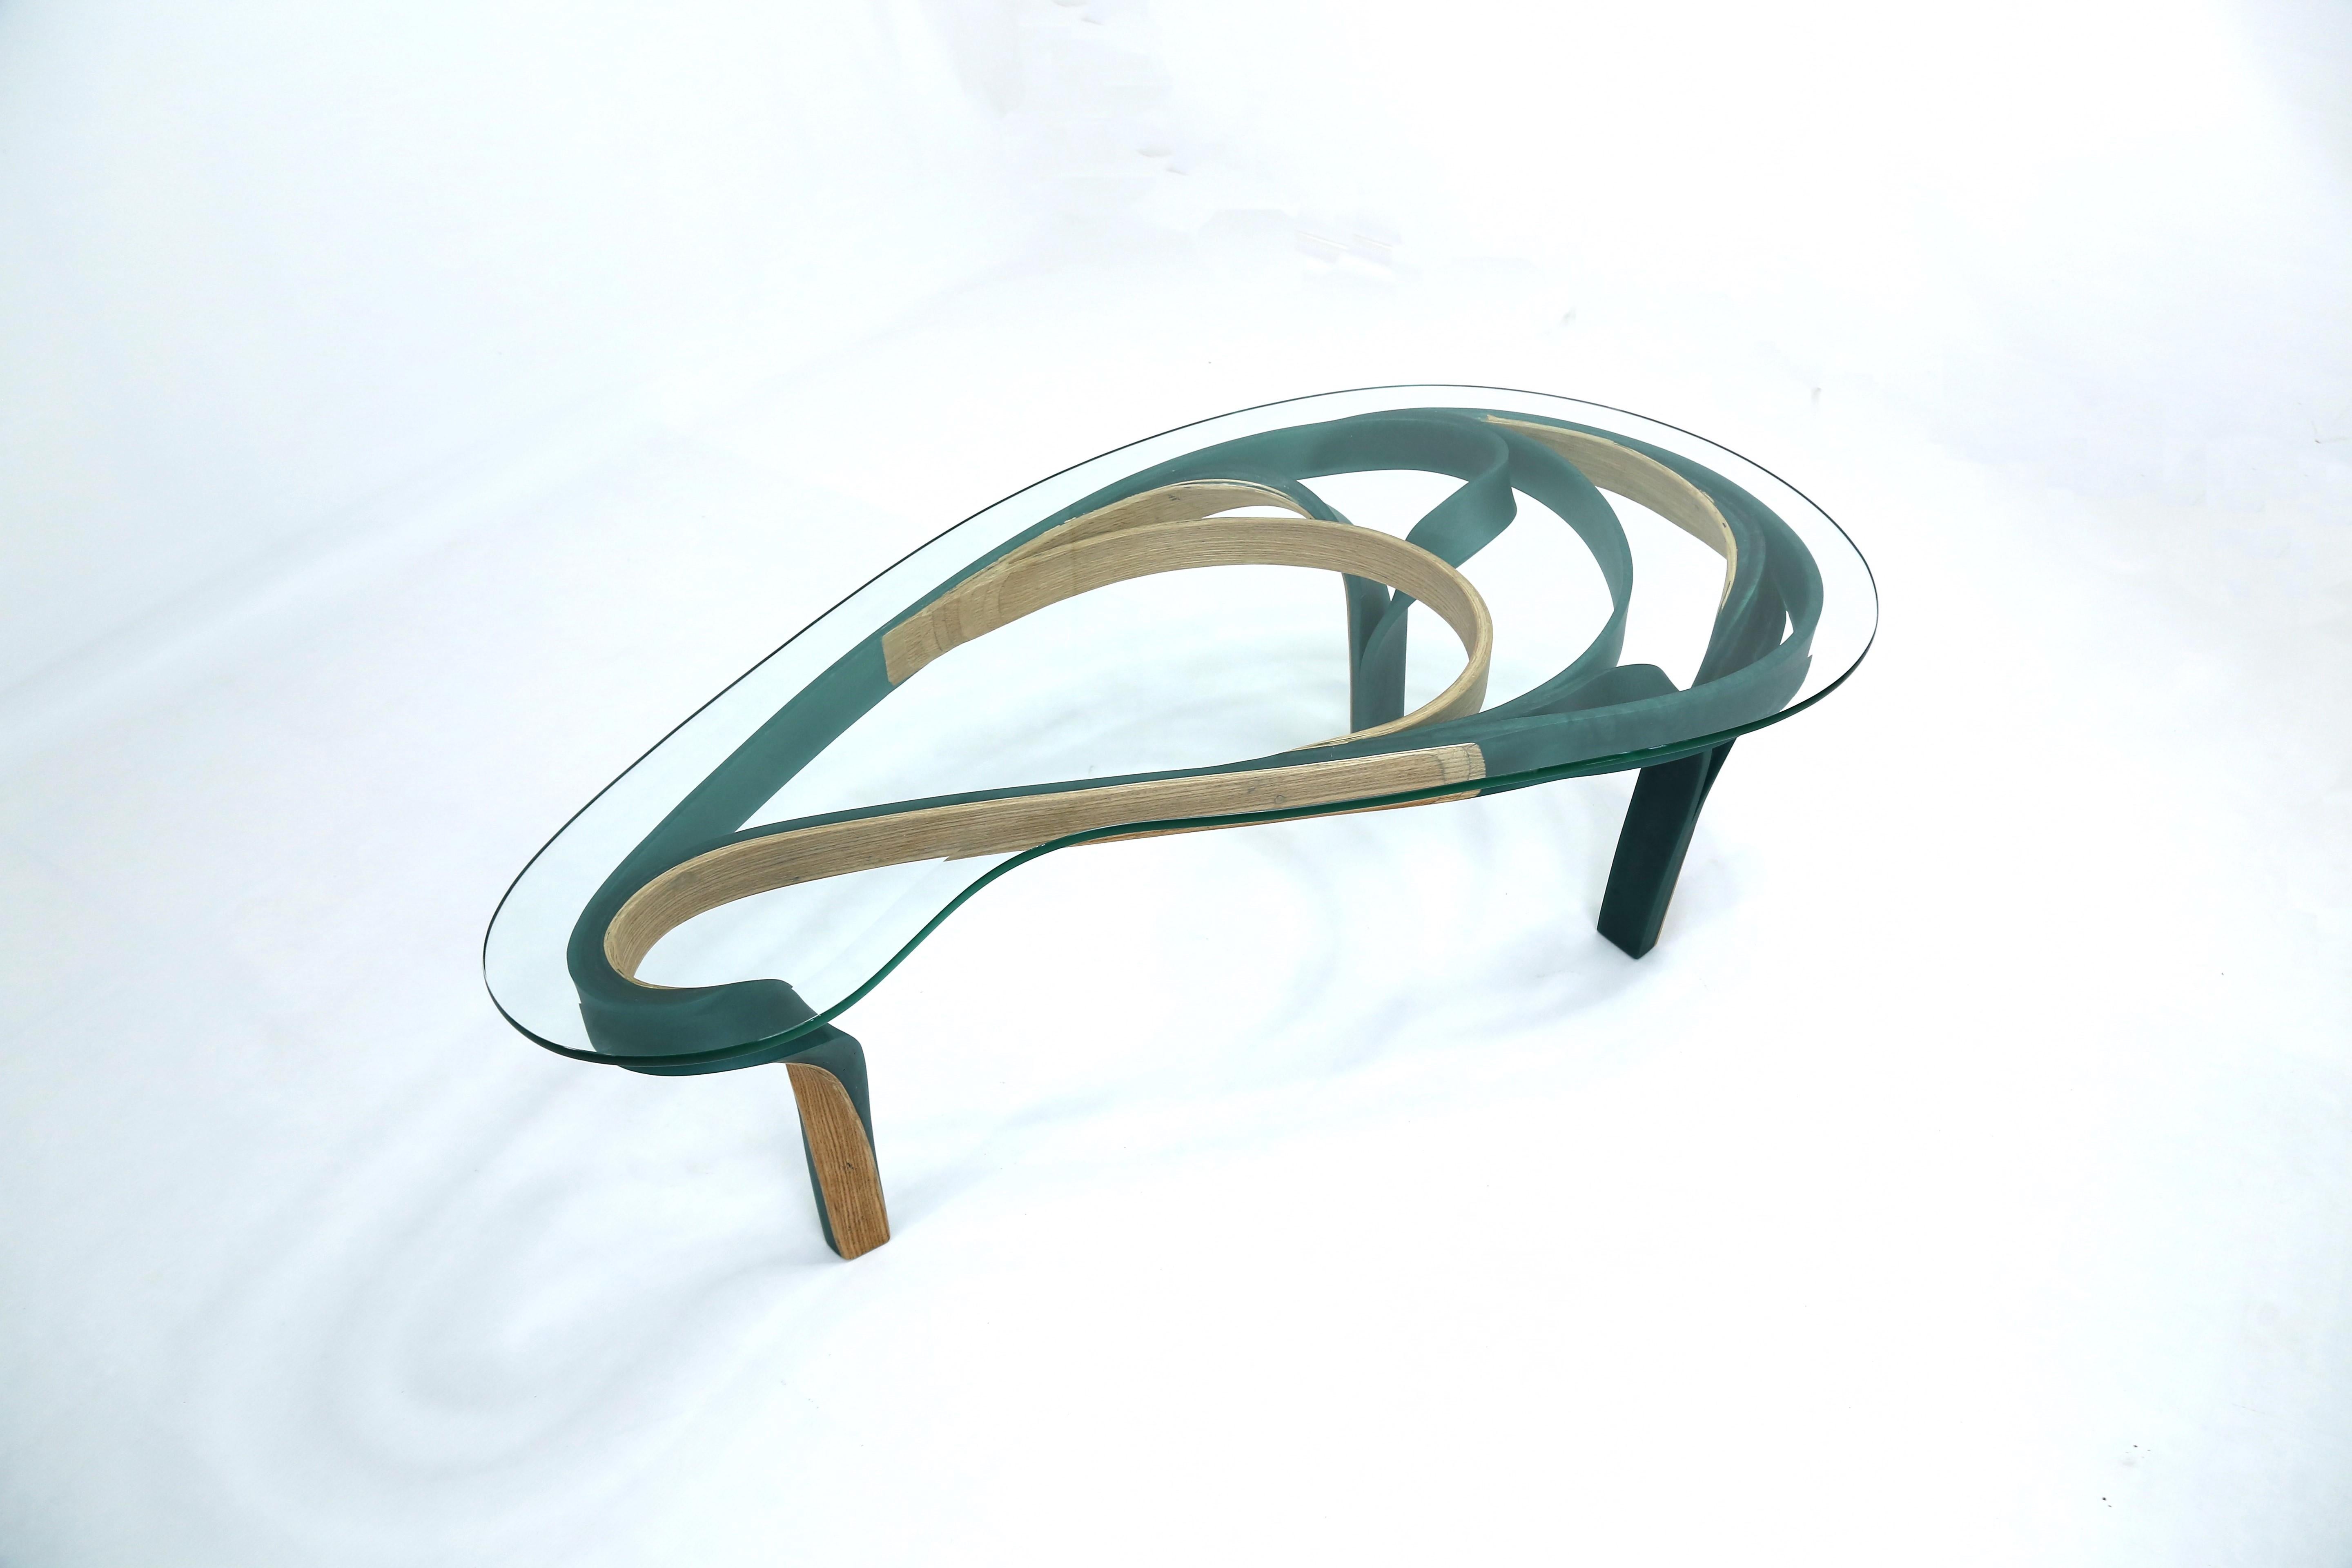 The Aquila Table has a bevelled glass top which is supported by a resin and ash wood frame in a paizlee shape which flows organically to create one of the supports. The other two supports stem smoothly from the frame and swirl towards the floor. The